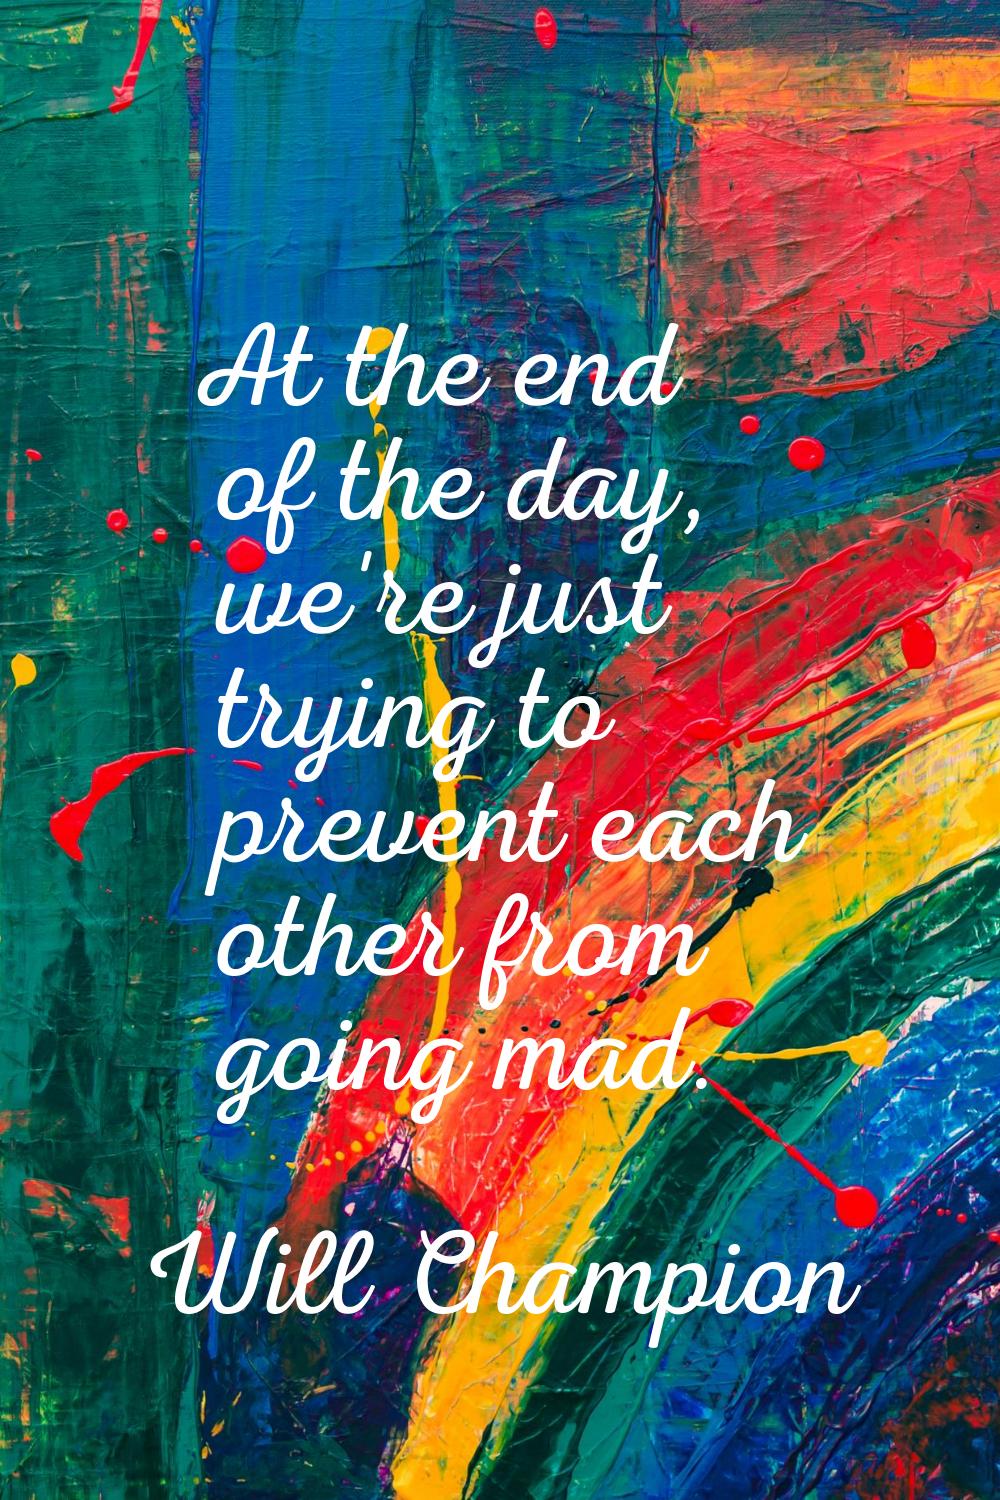 At the end of the day, we're just trying to prevent each other from going mad.